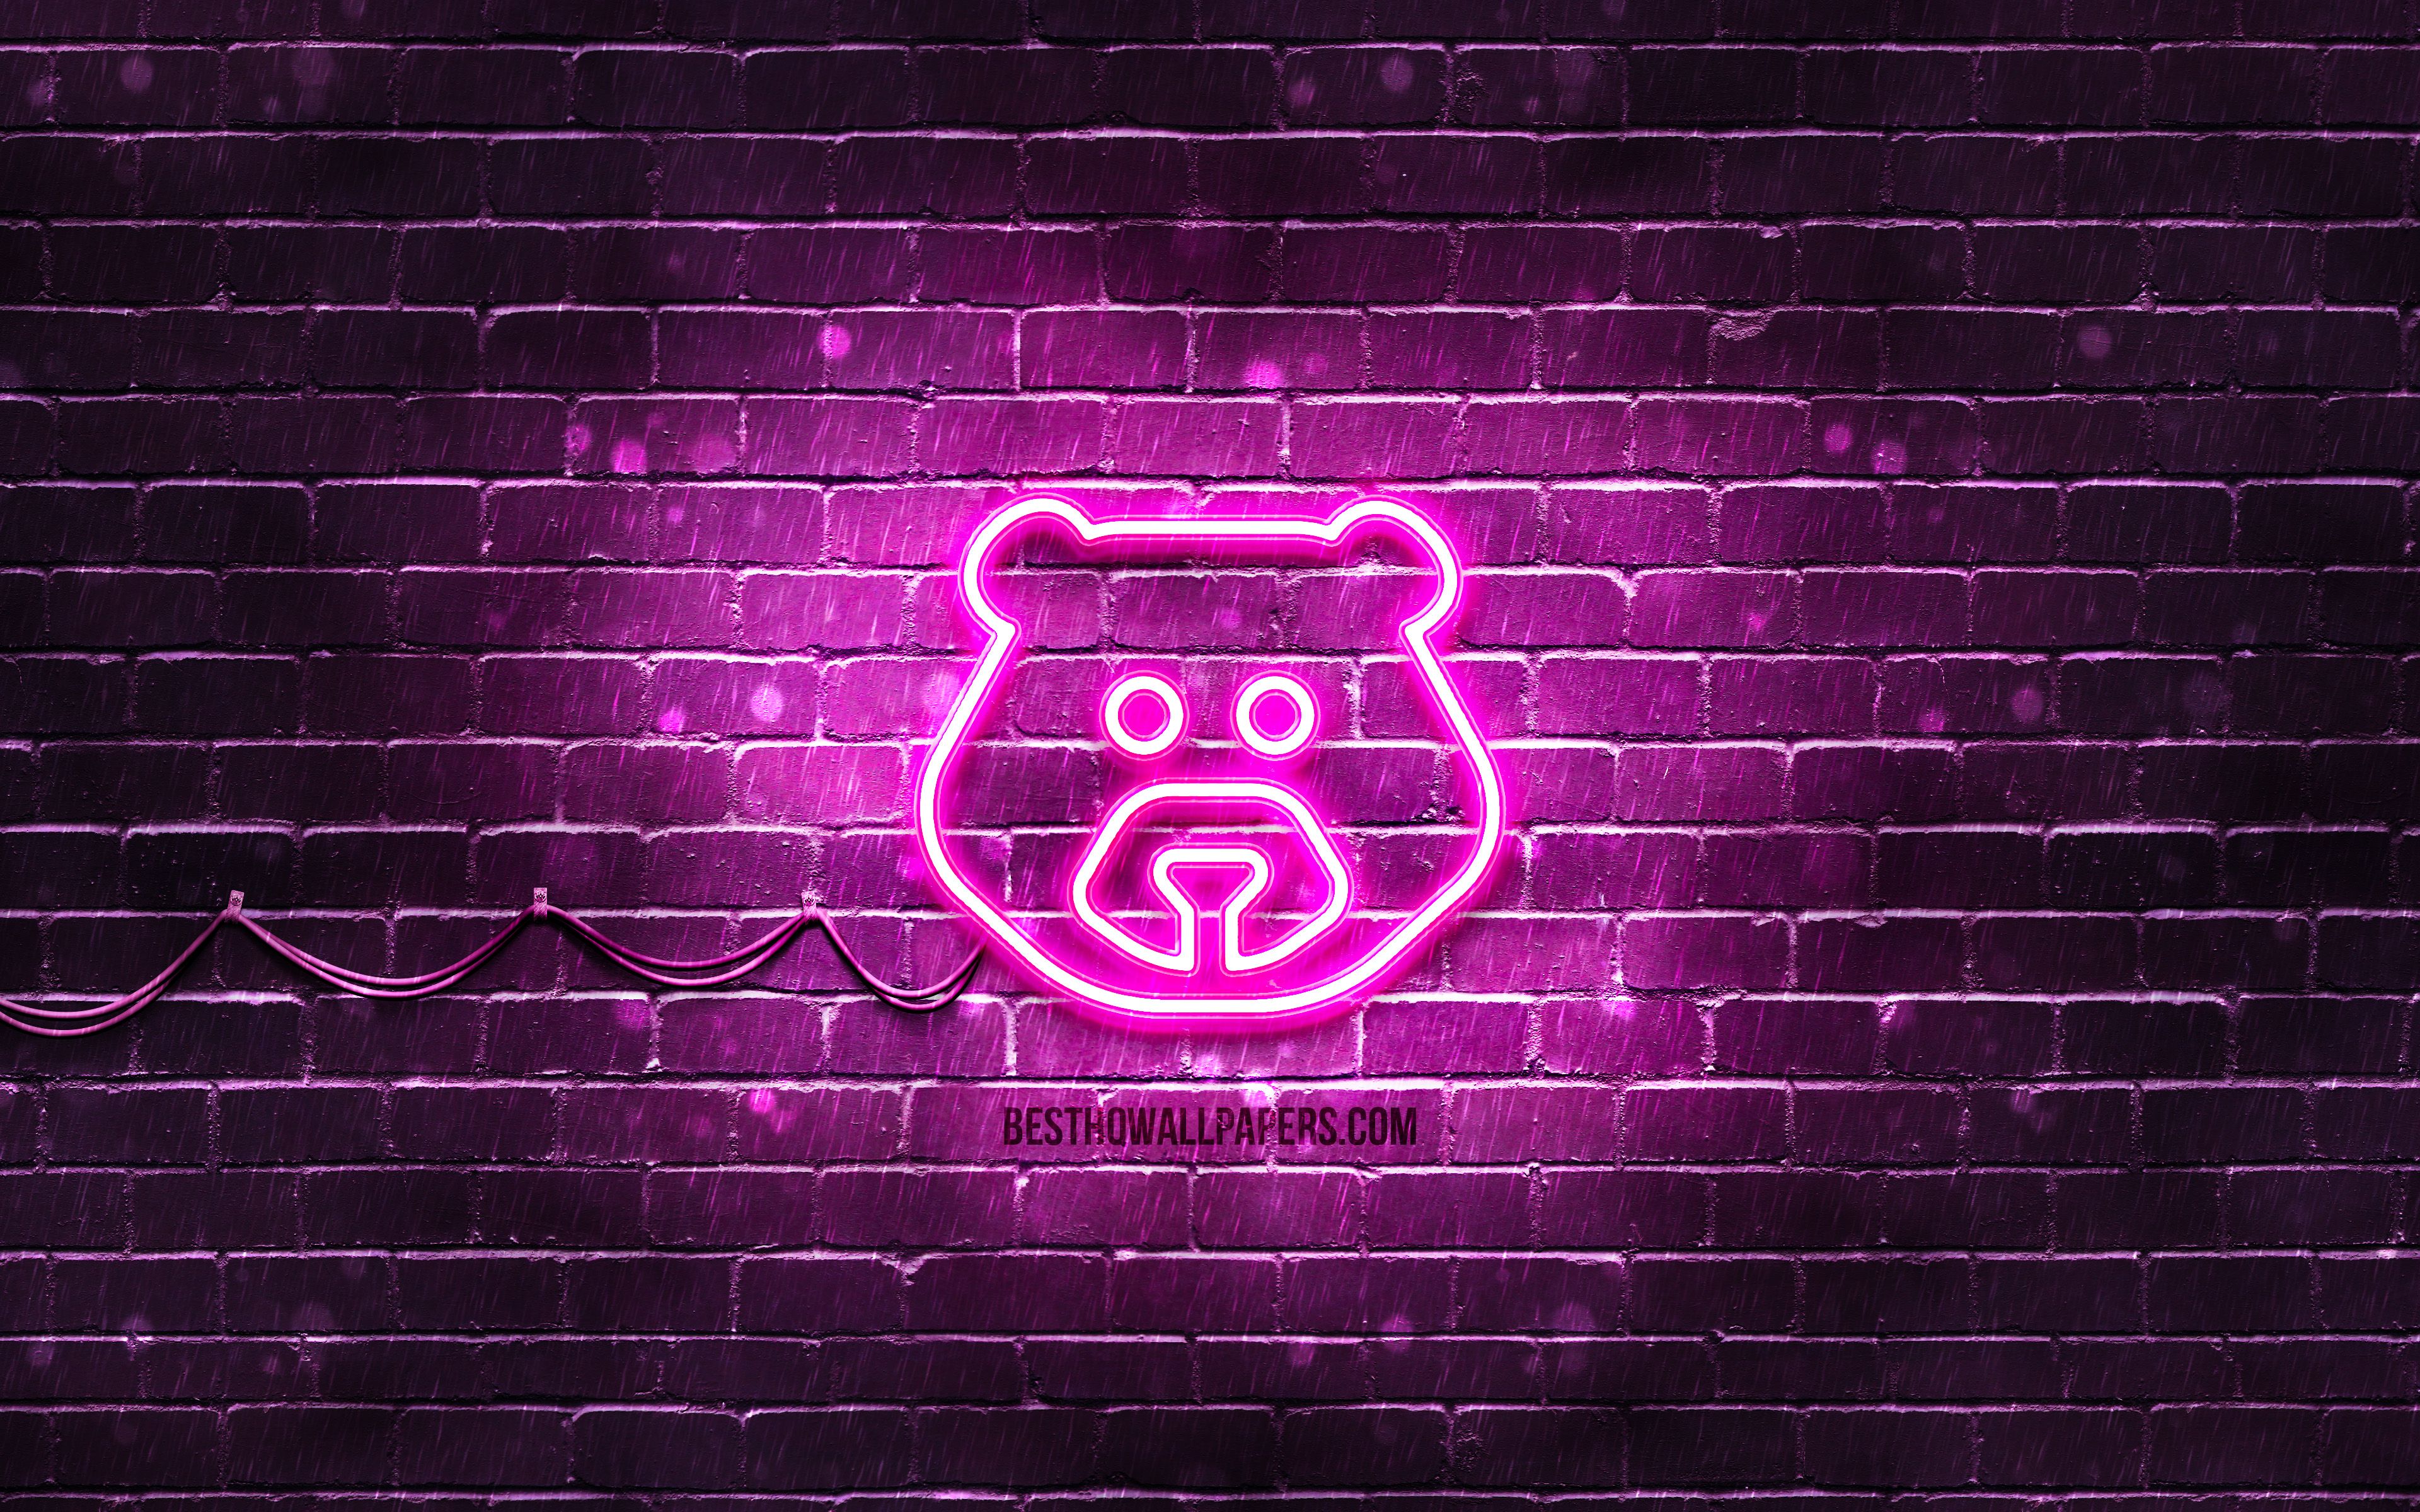 Download wallpaper Bear neon icon, 4k, purple background, neon symbols, Bear, creative, neon icons, Bear sign, animals signs, Bear icon, animals icons for desktop with resolution 3840x2400. High Quality HD picture wallpaper